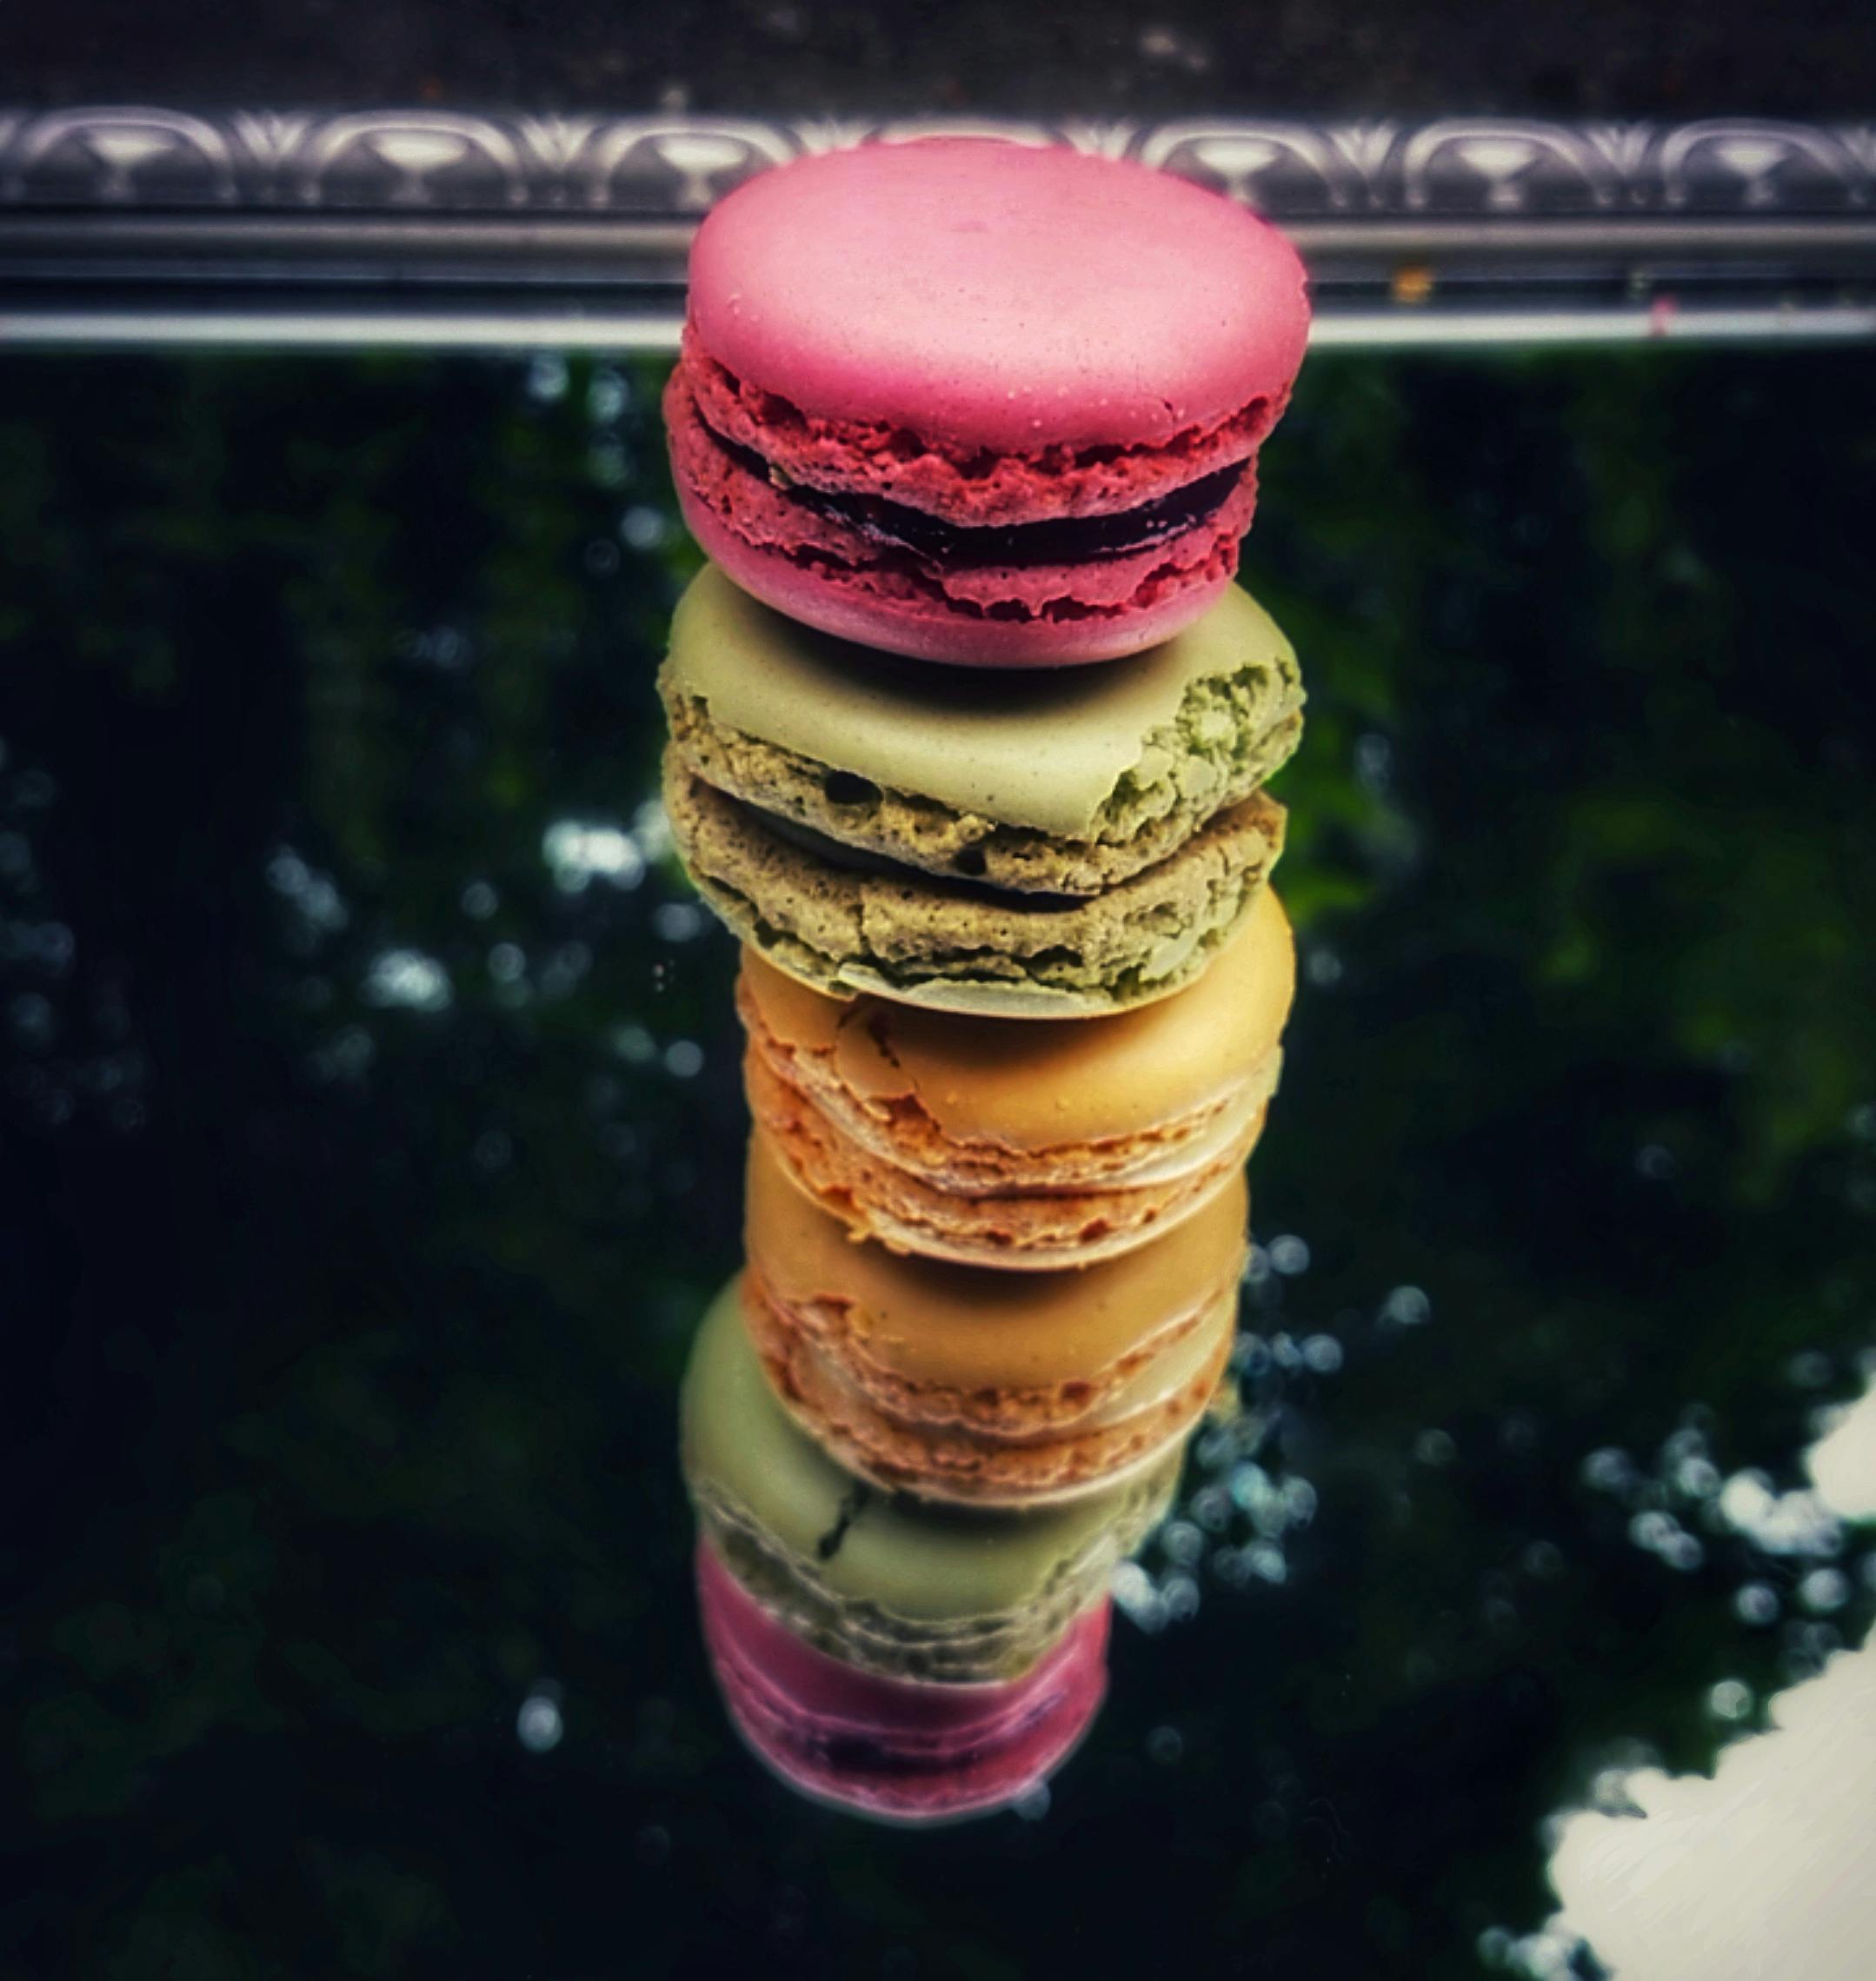 Free stock photo of macarons mirror glass nature food sweets cake